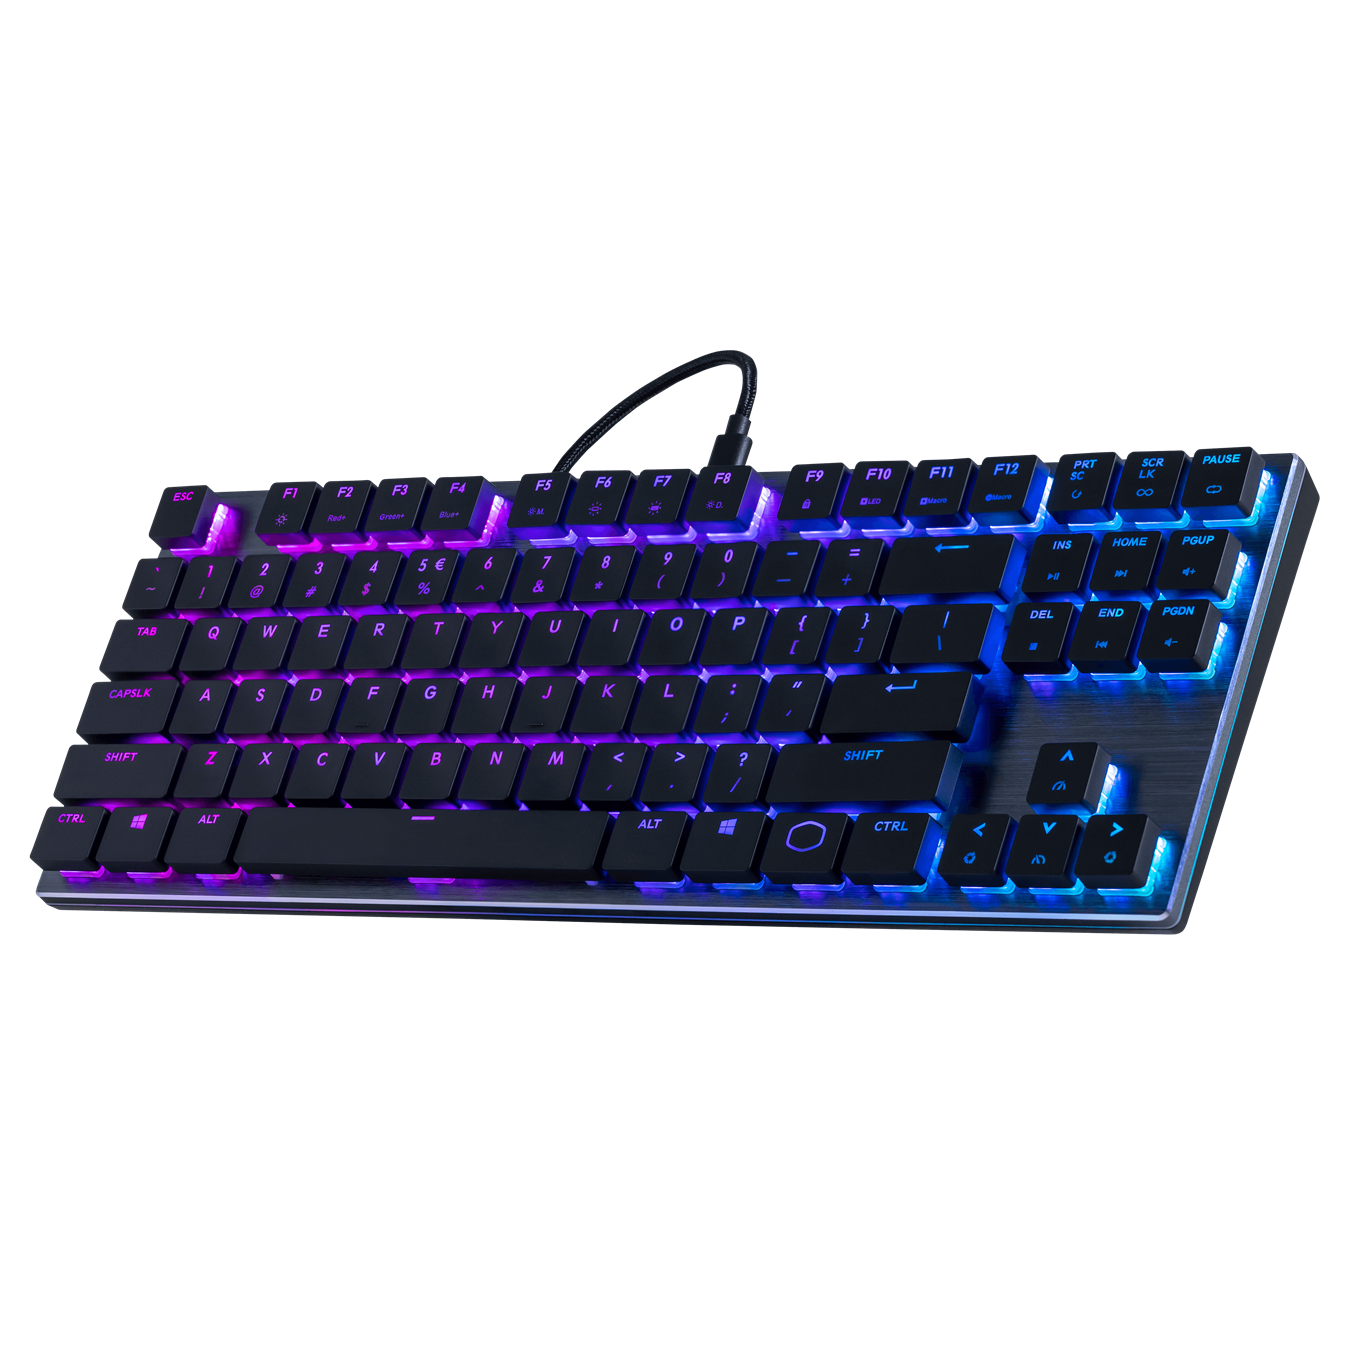 SK630 TKL Low Profile RGB Mechanical Keyboard - employs rollover technologies that result in the most efficient, accurate anti-ghosting technology yet